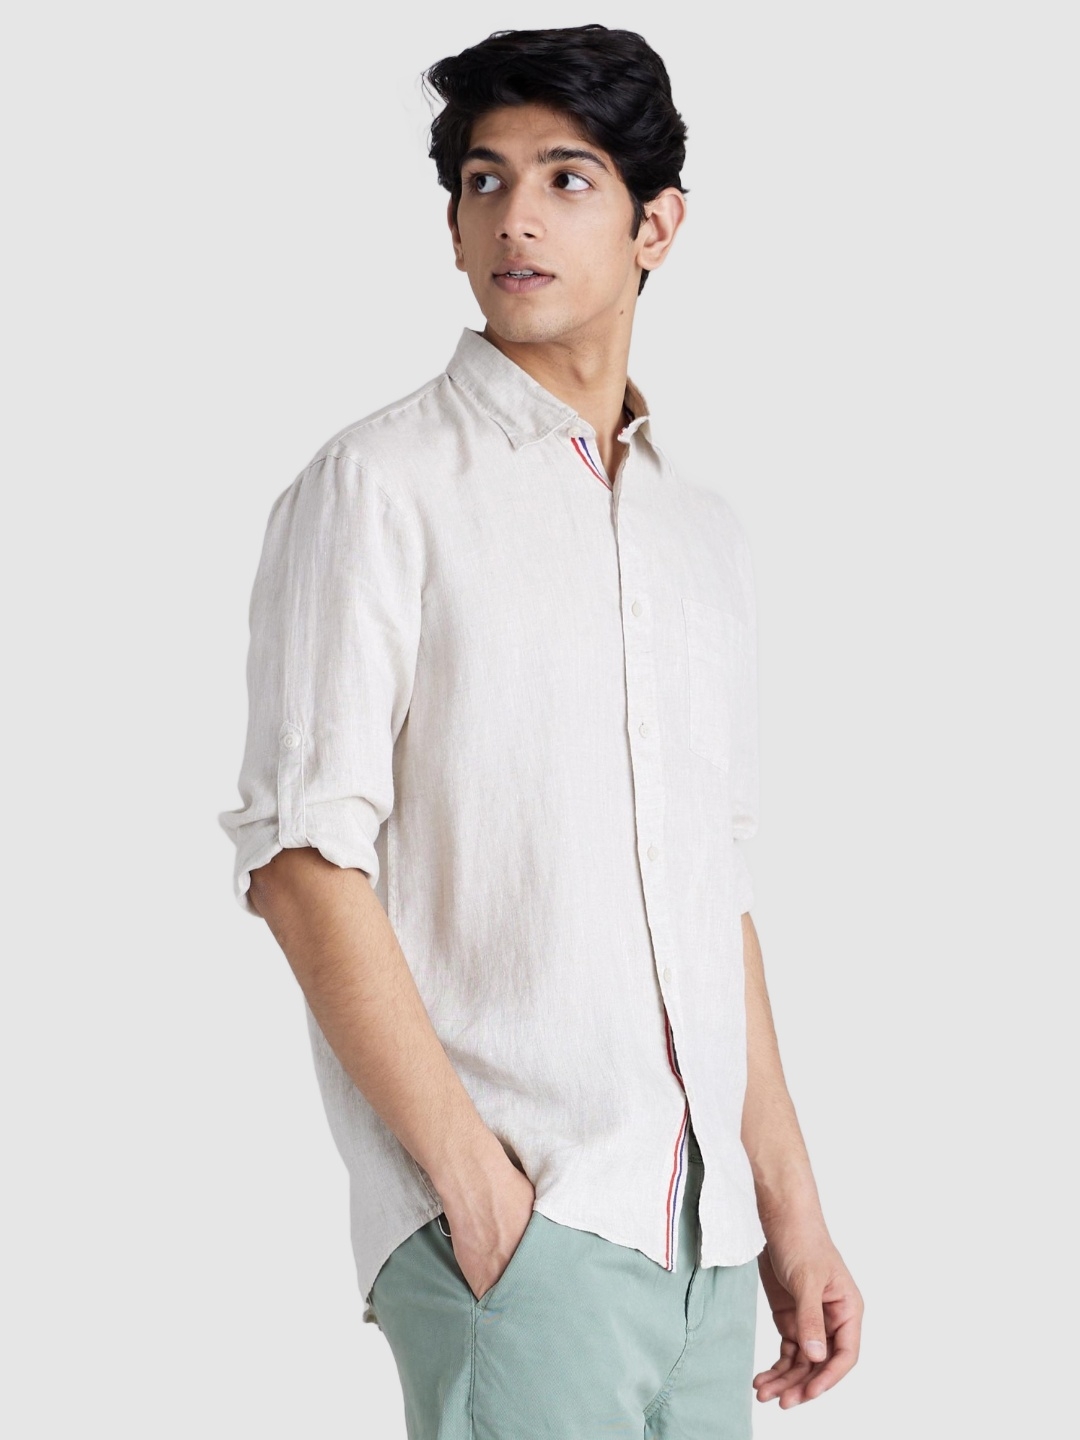 Men's Off White Linen Solid Casual Shirt